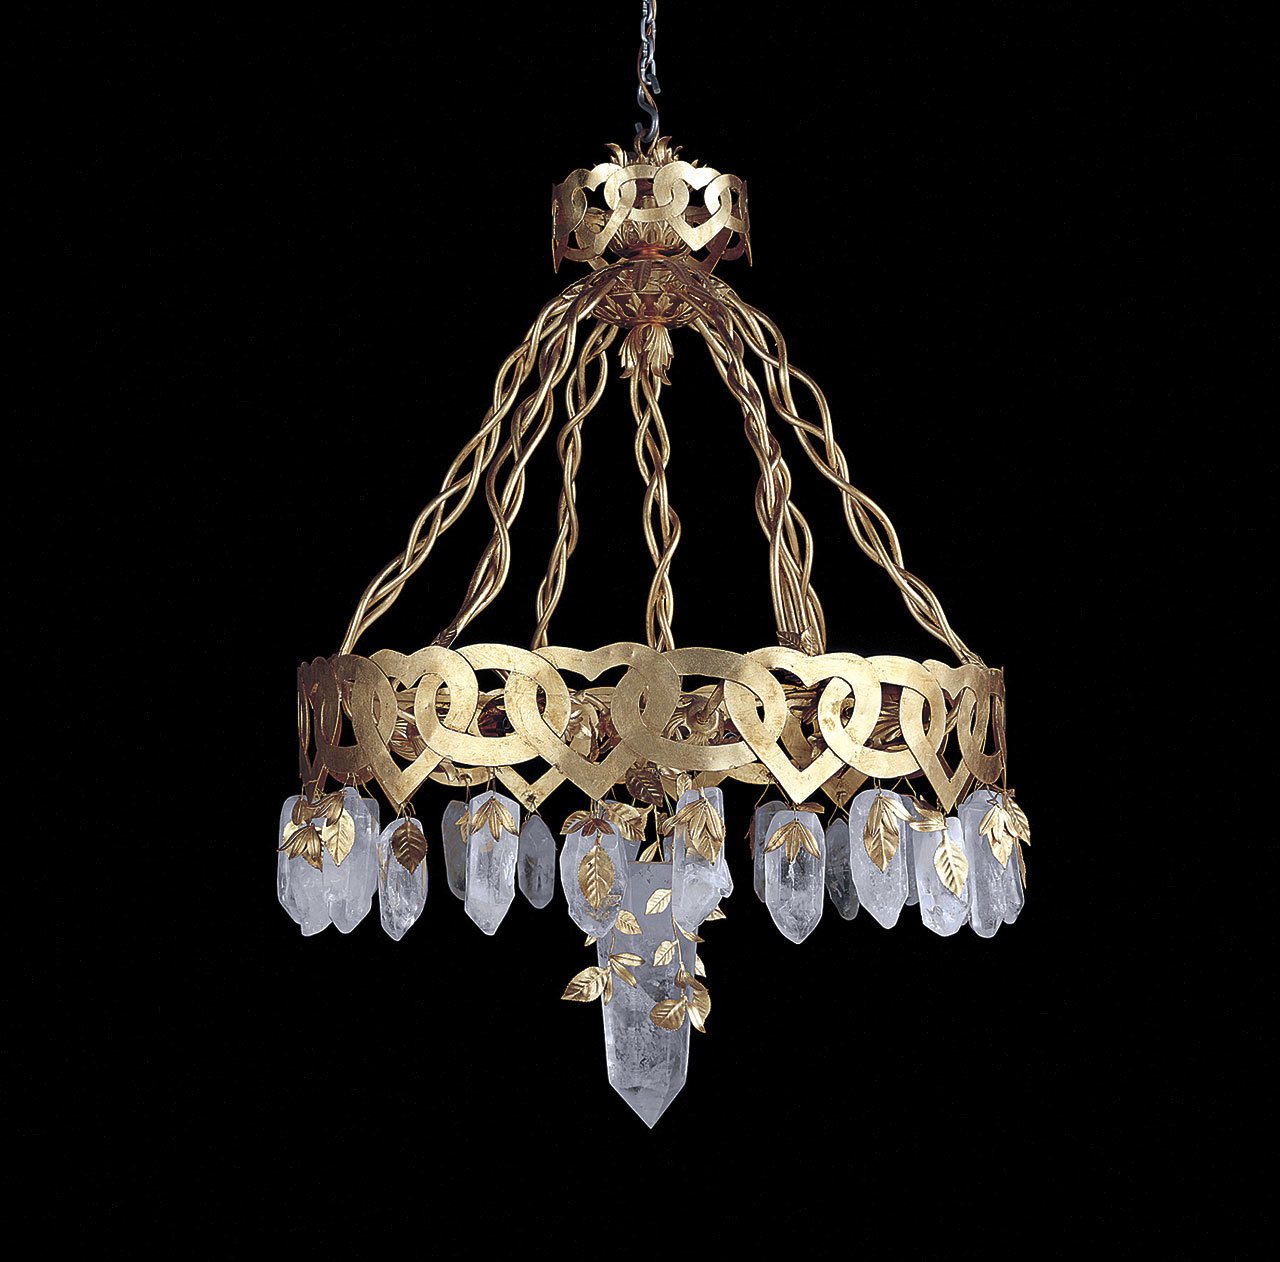 Famous Coco Chanel chandelier a high value item 